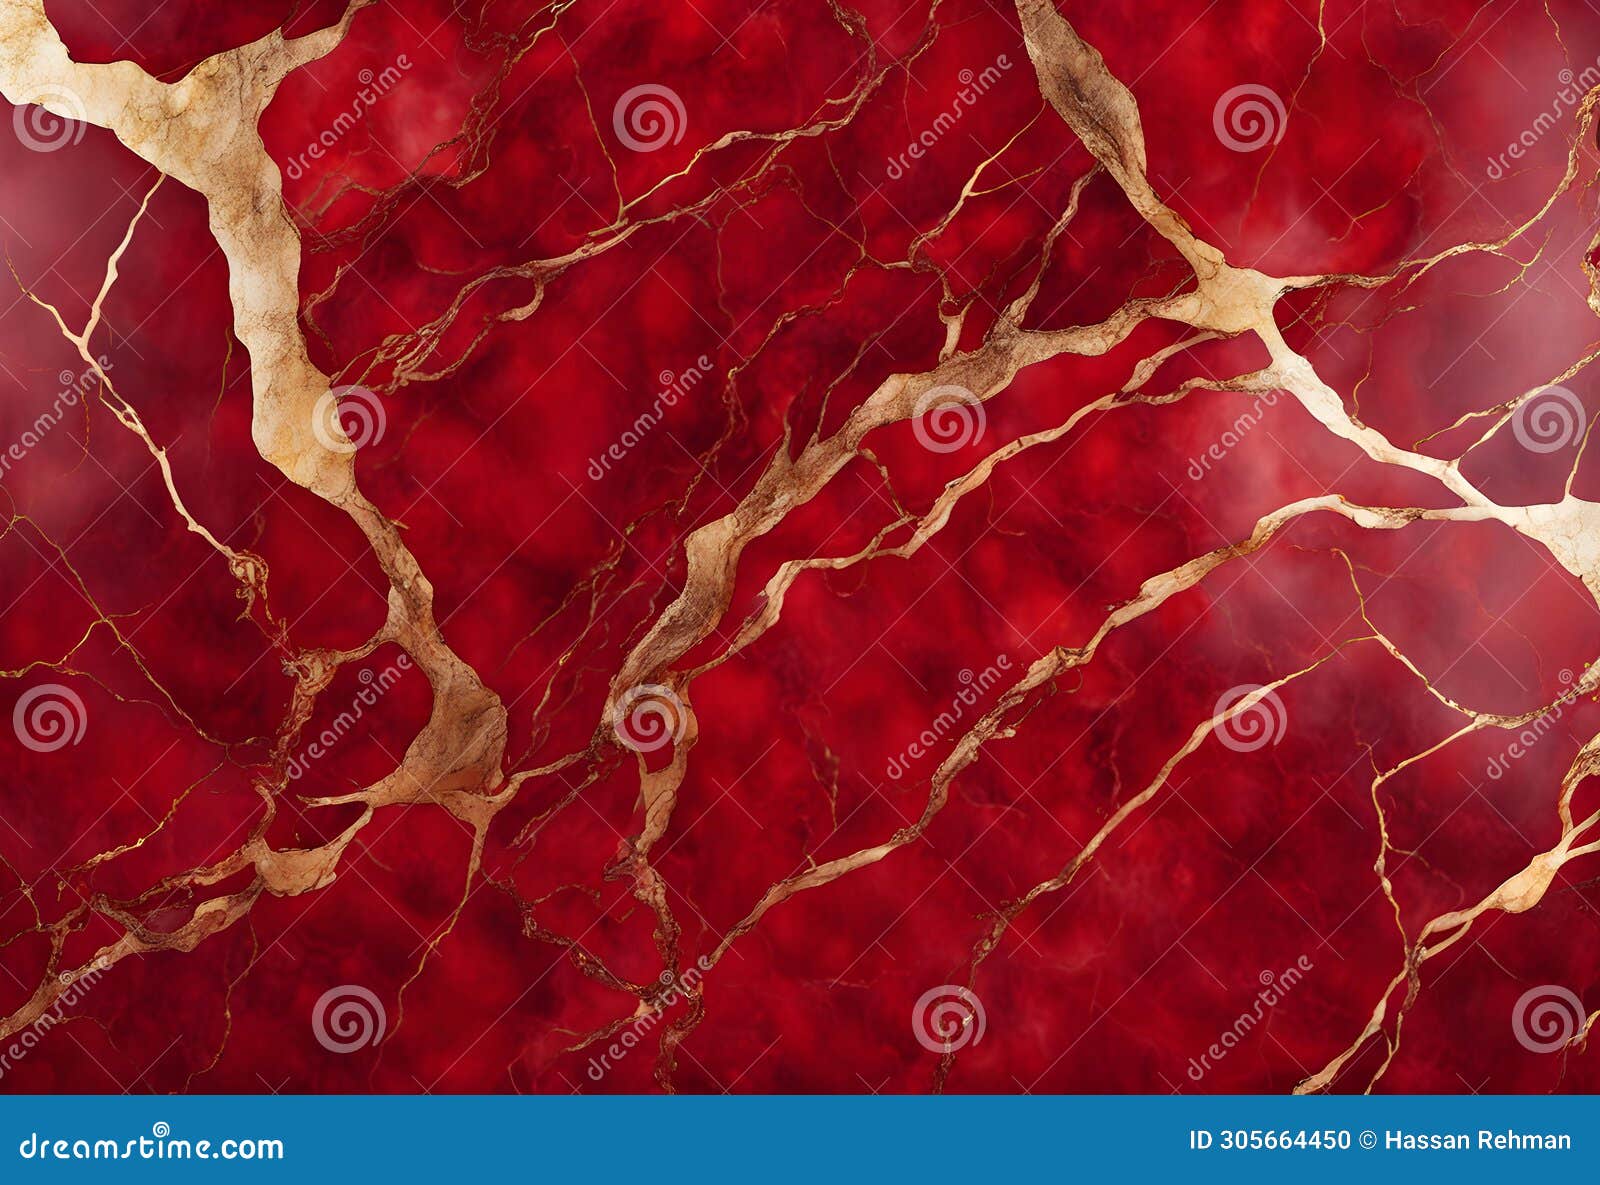 red marble texture with golden veins marbletexture